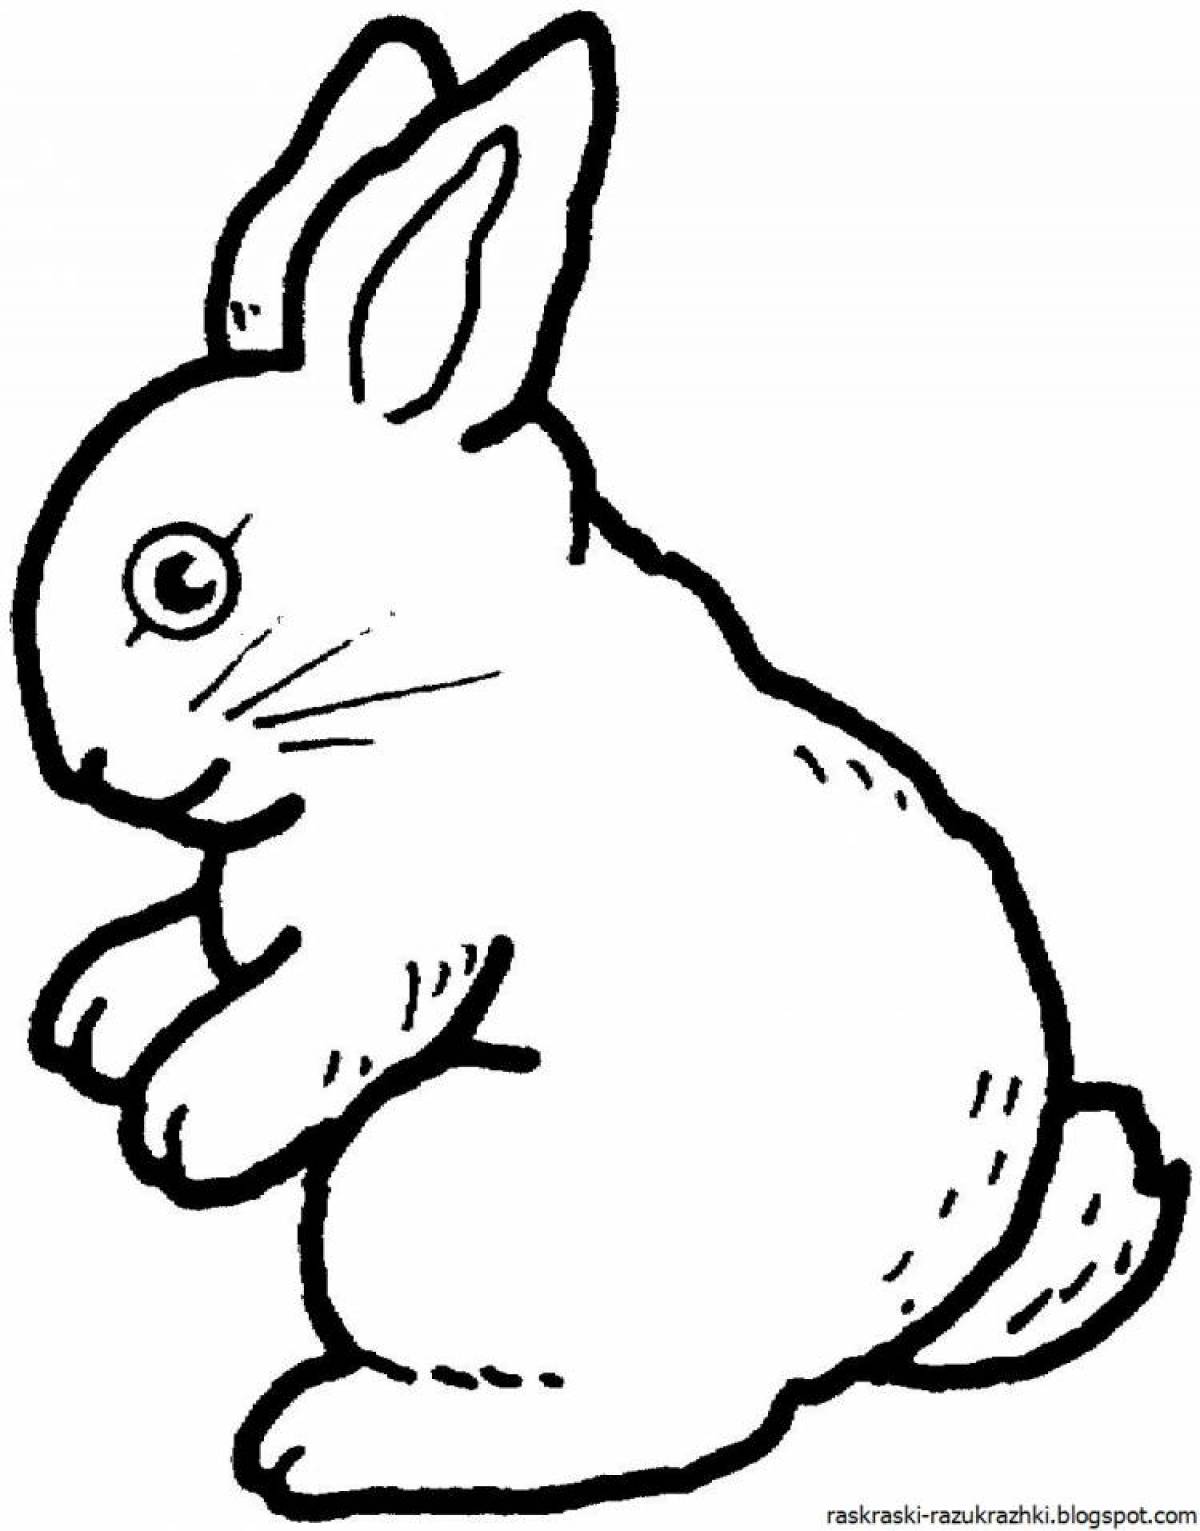 Snuggly coloring page rabbit for kids